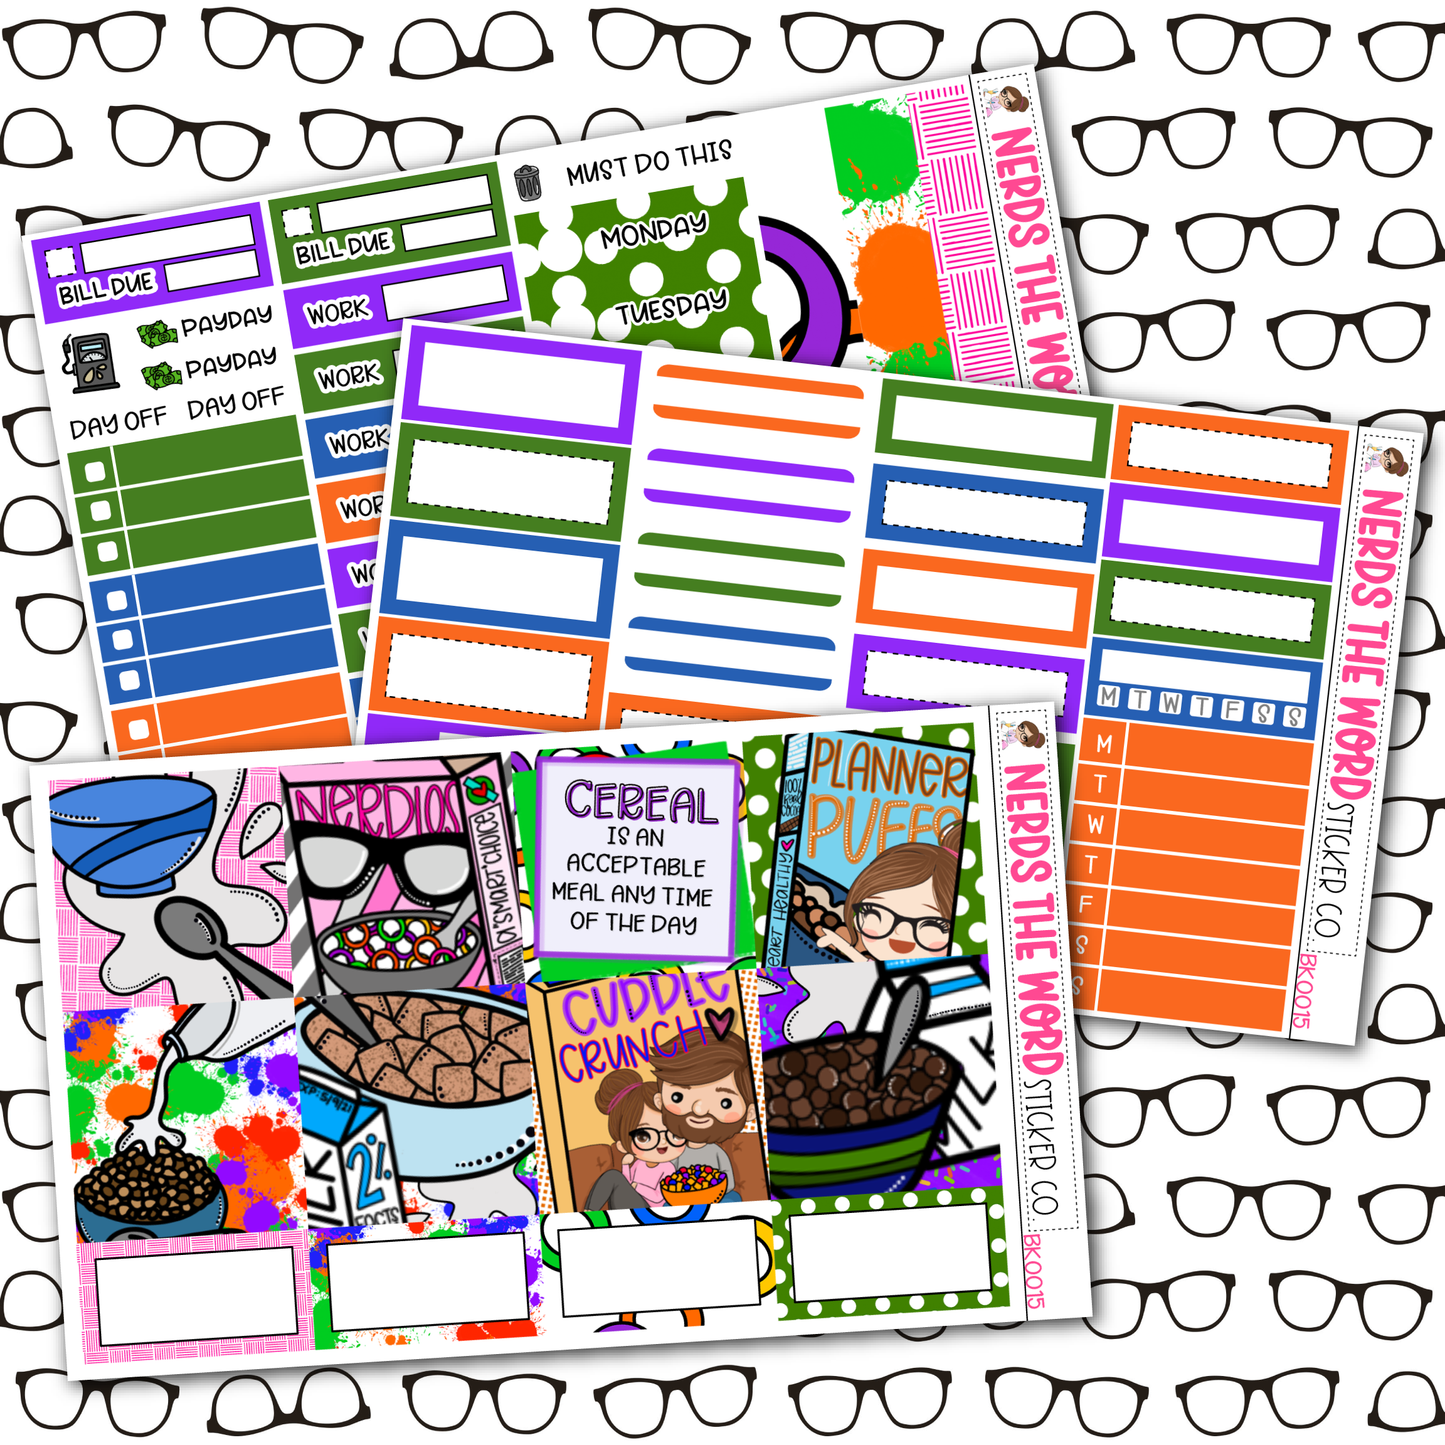 Cereal Weekly Planner Kit